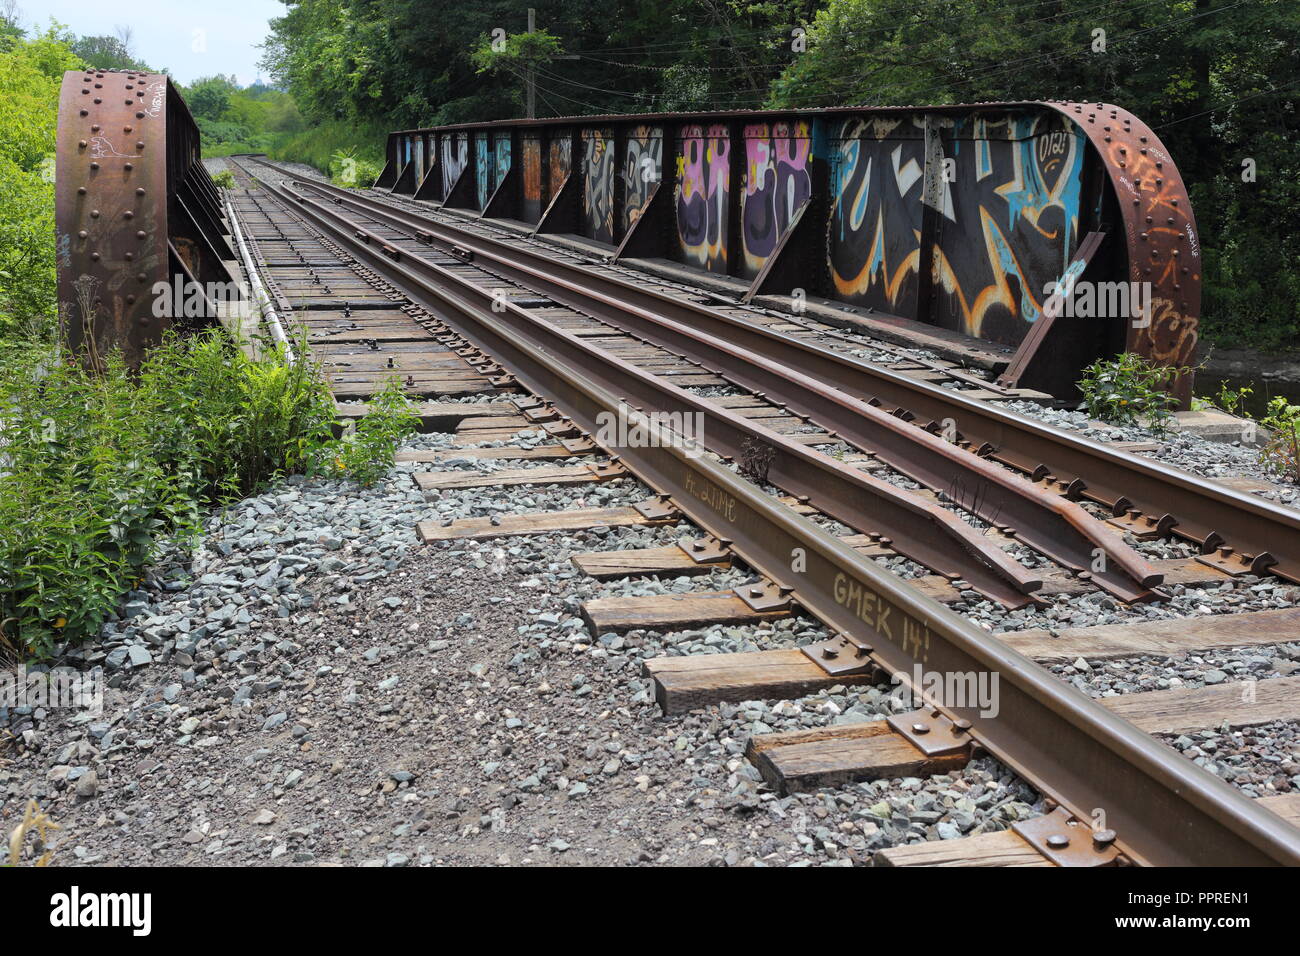 Abandoned train tracks with graffiti off of the Beltline trail in Toronto, Ontario, Canada. Stock Photo